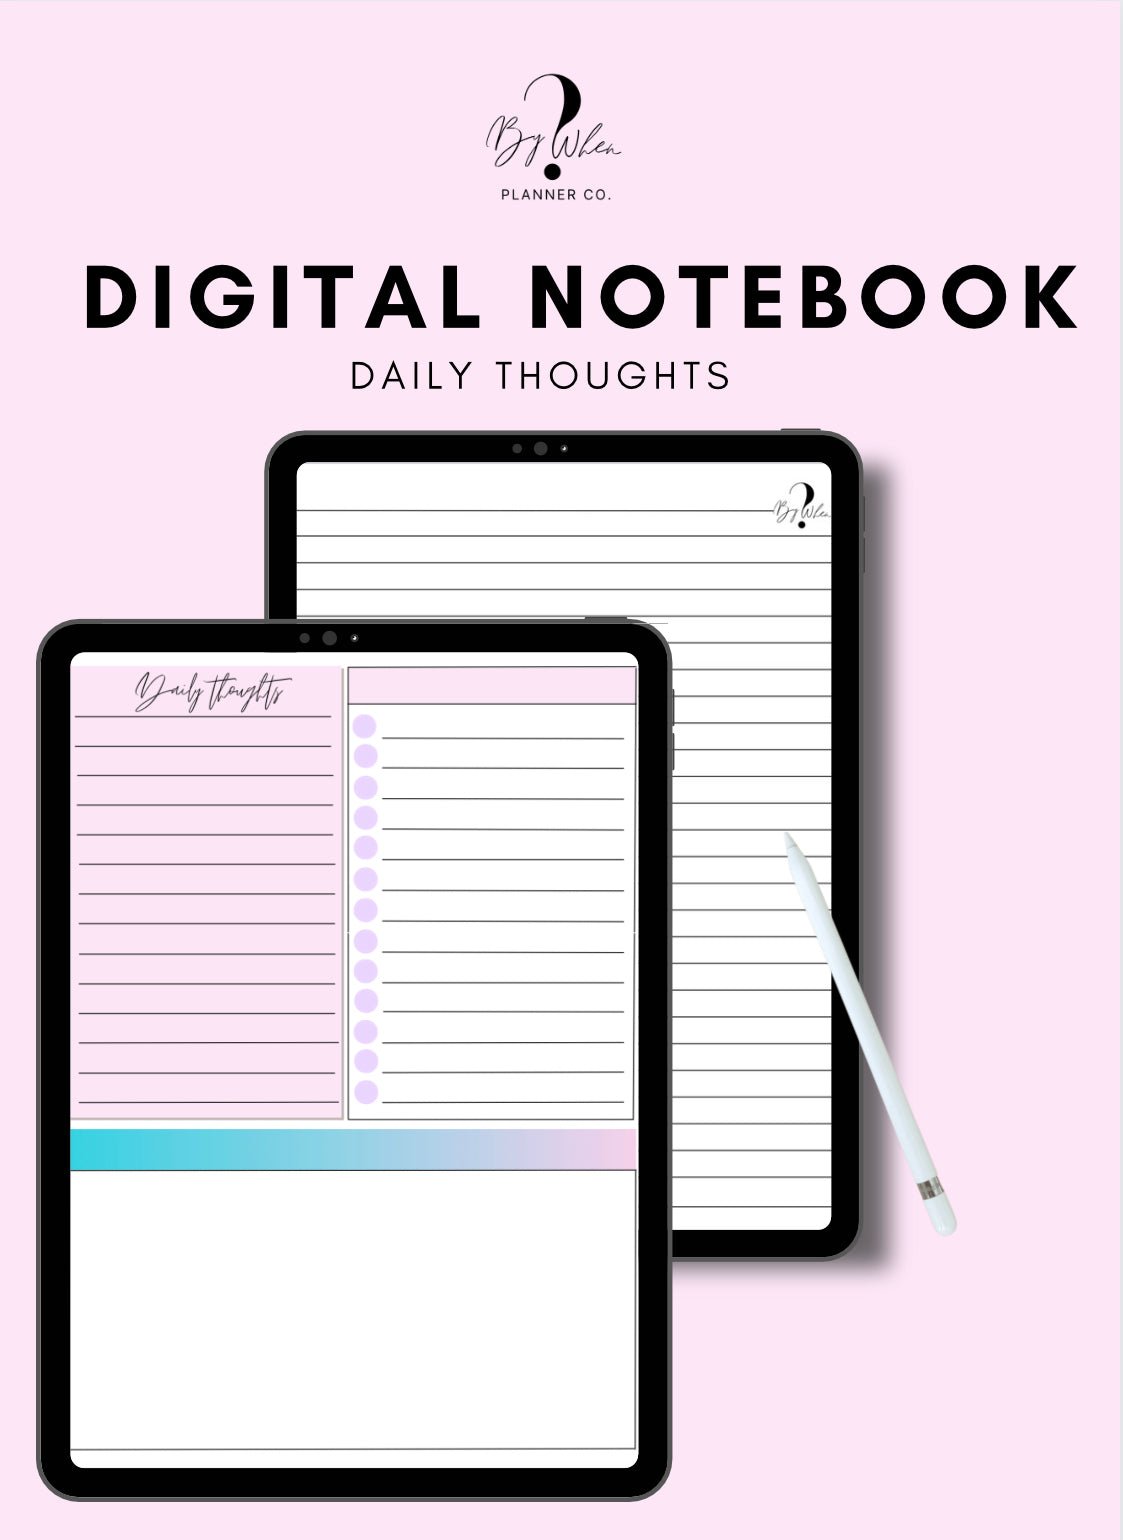 Daily Thoughts Notebook (Digital Download) - By When? Planner Co.